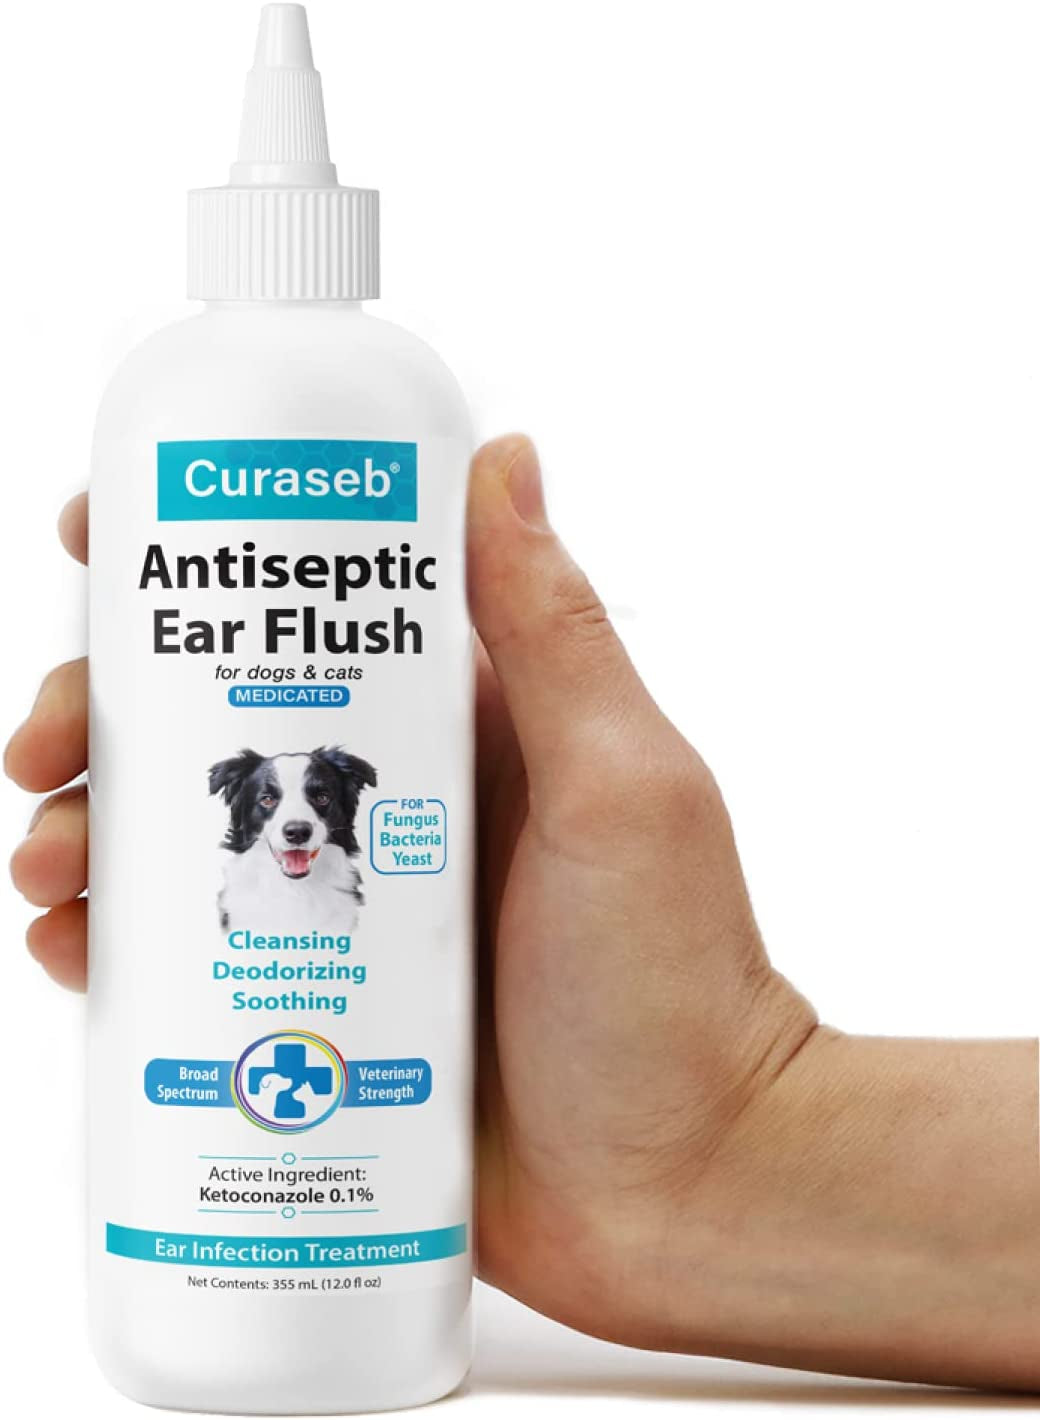 Curaseb Dog Ear Infection Treatment Solution – Soothes Itchy & Inflamed Ears – Cleans Debris and Buildup - 12Oz